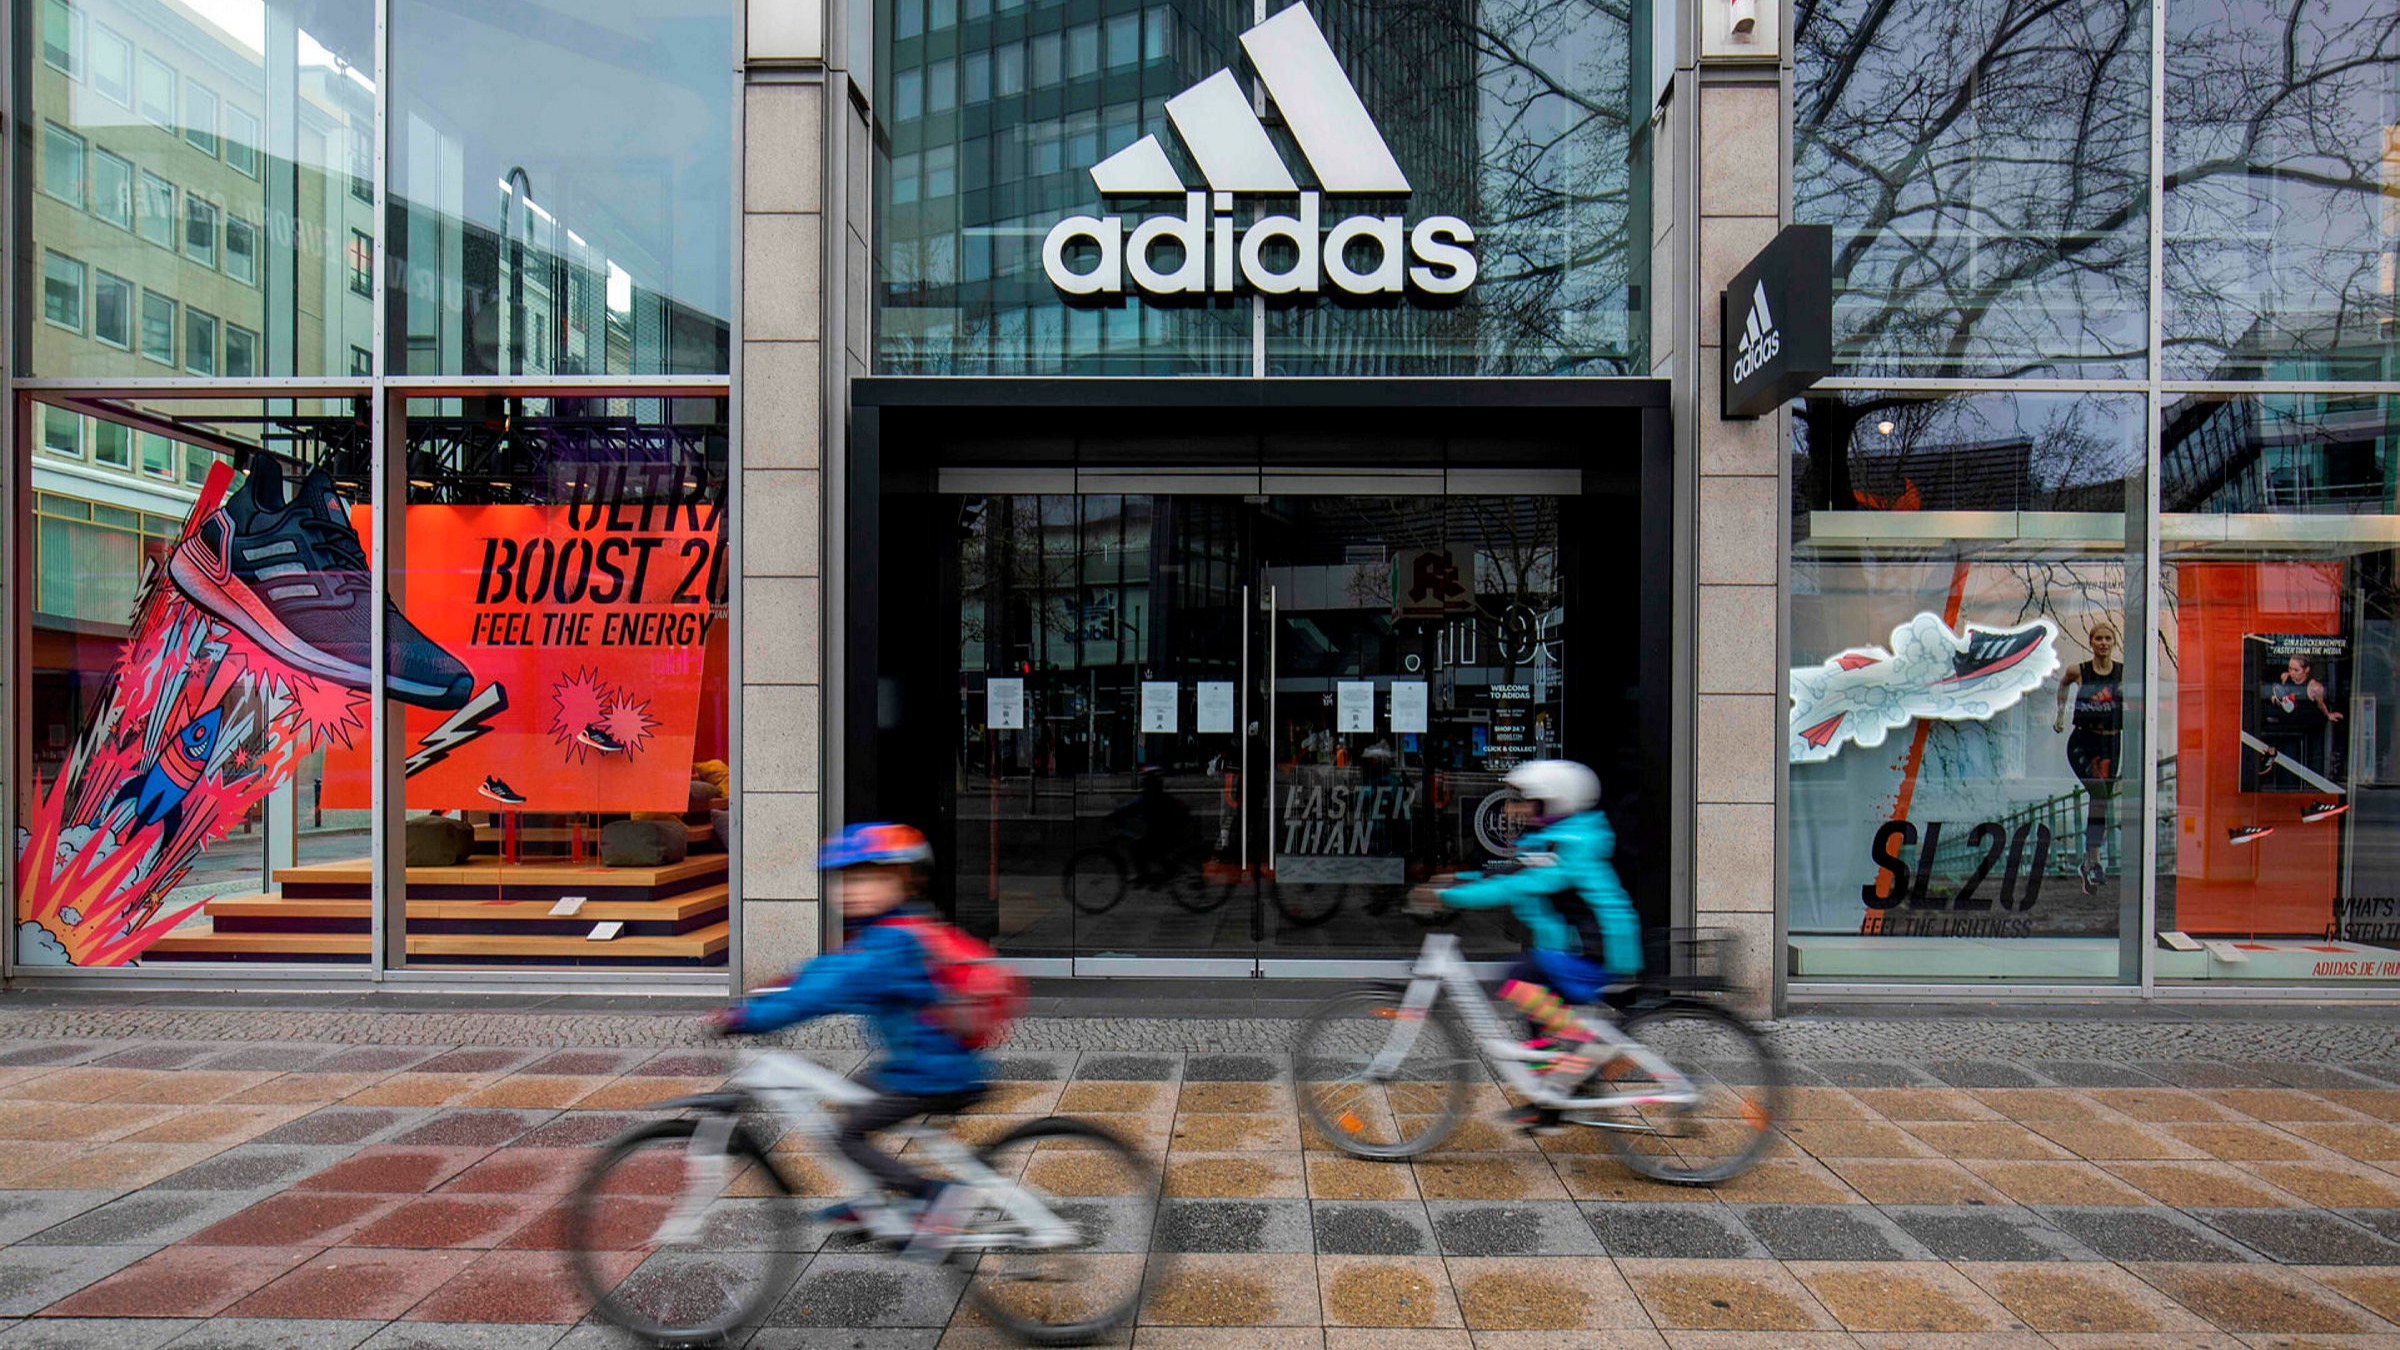 riega la flor Mecánica Ru Adidas aims to cut out retailers in renewed push for growth | Financial  Times